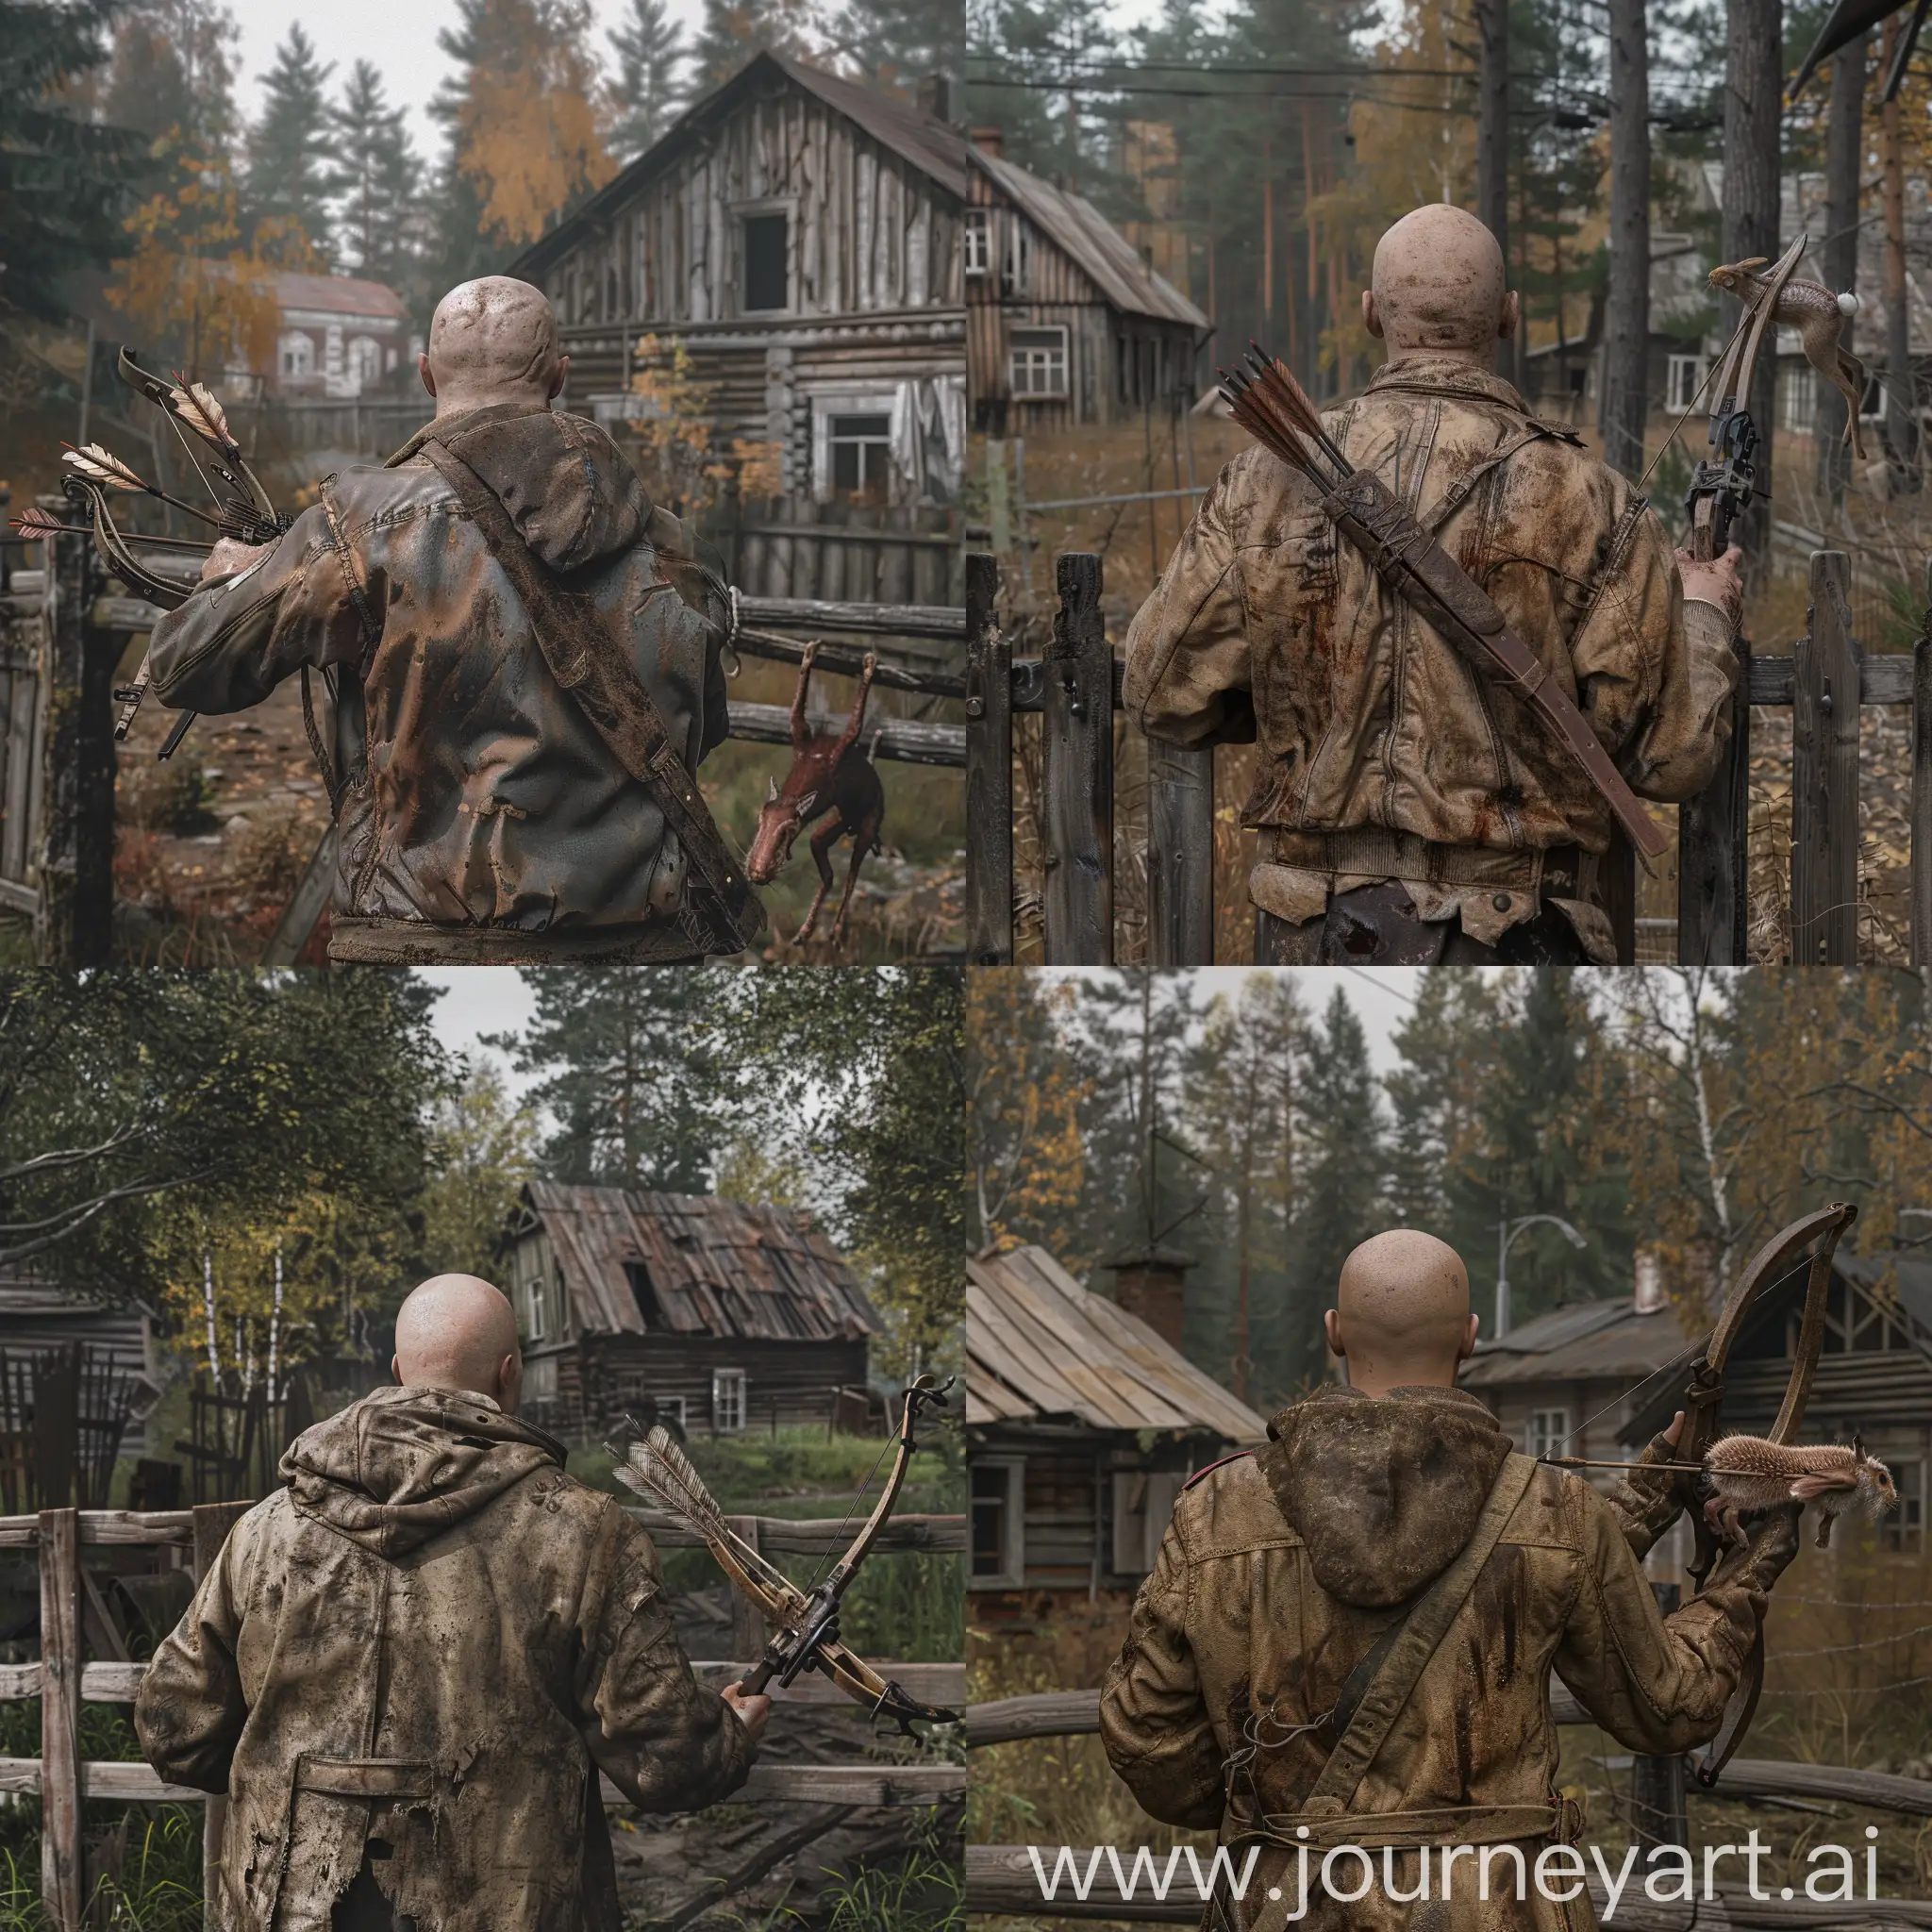 man, bald head, old jacket, back view, crossbow in hand, hare carcass in the other hand, village, Russia, abandoned houses, trees, forest, man standing near the fence of one of the houses, the fence is wooden, hyper-realism, 8K image quality, ultra detail 